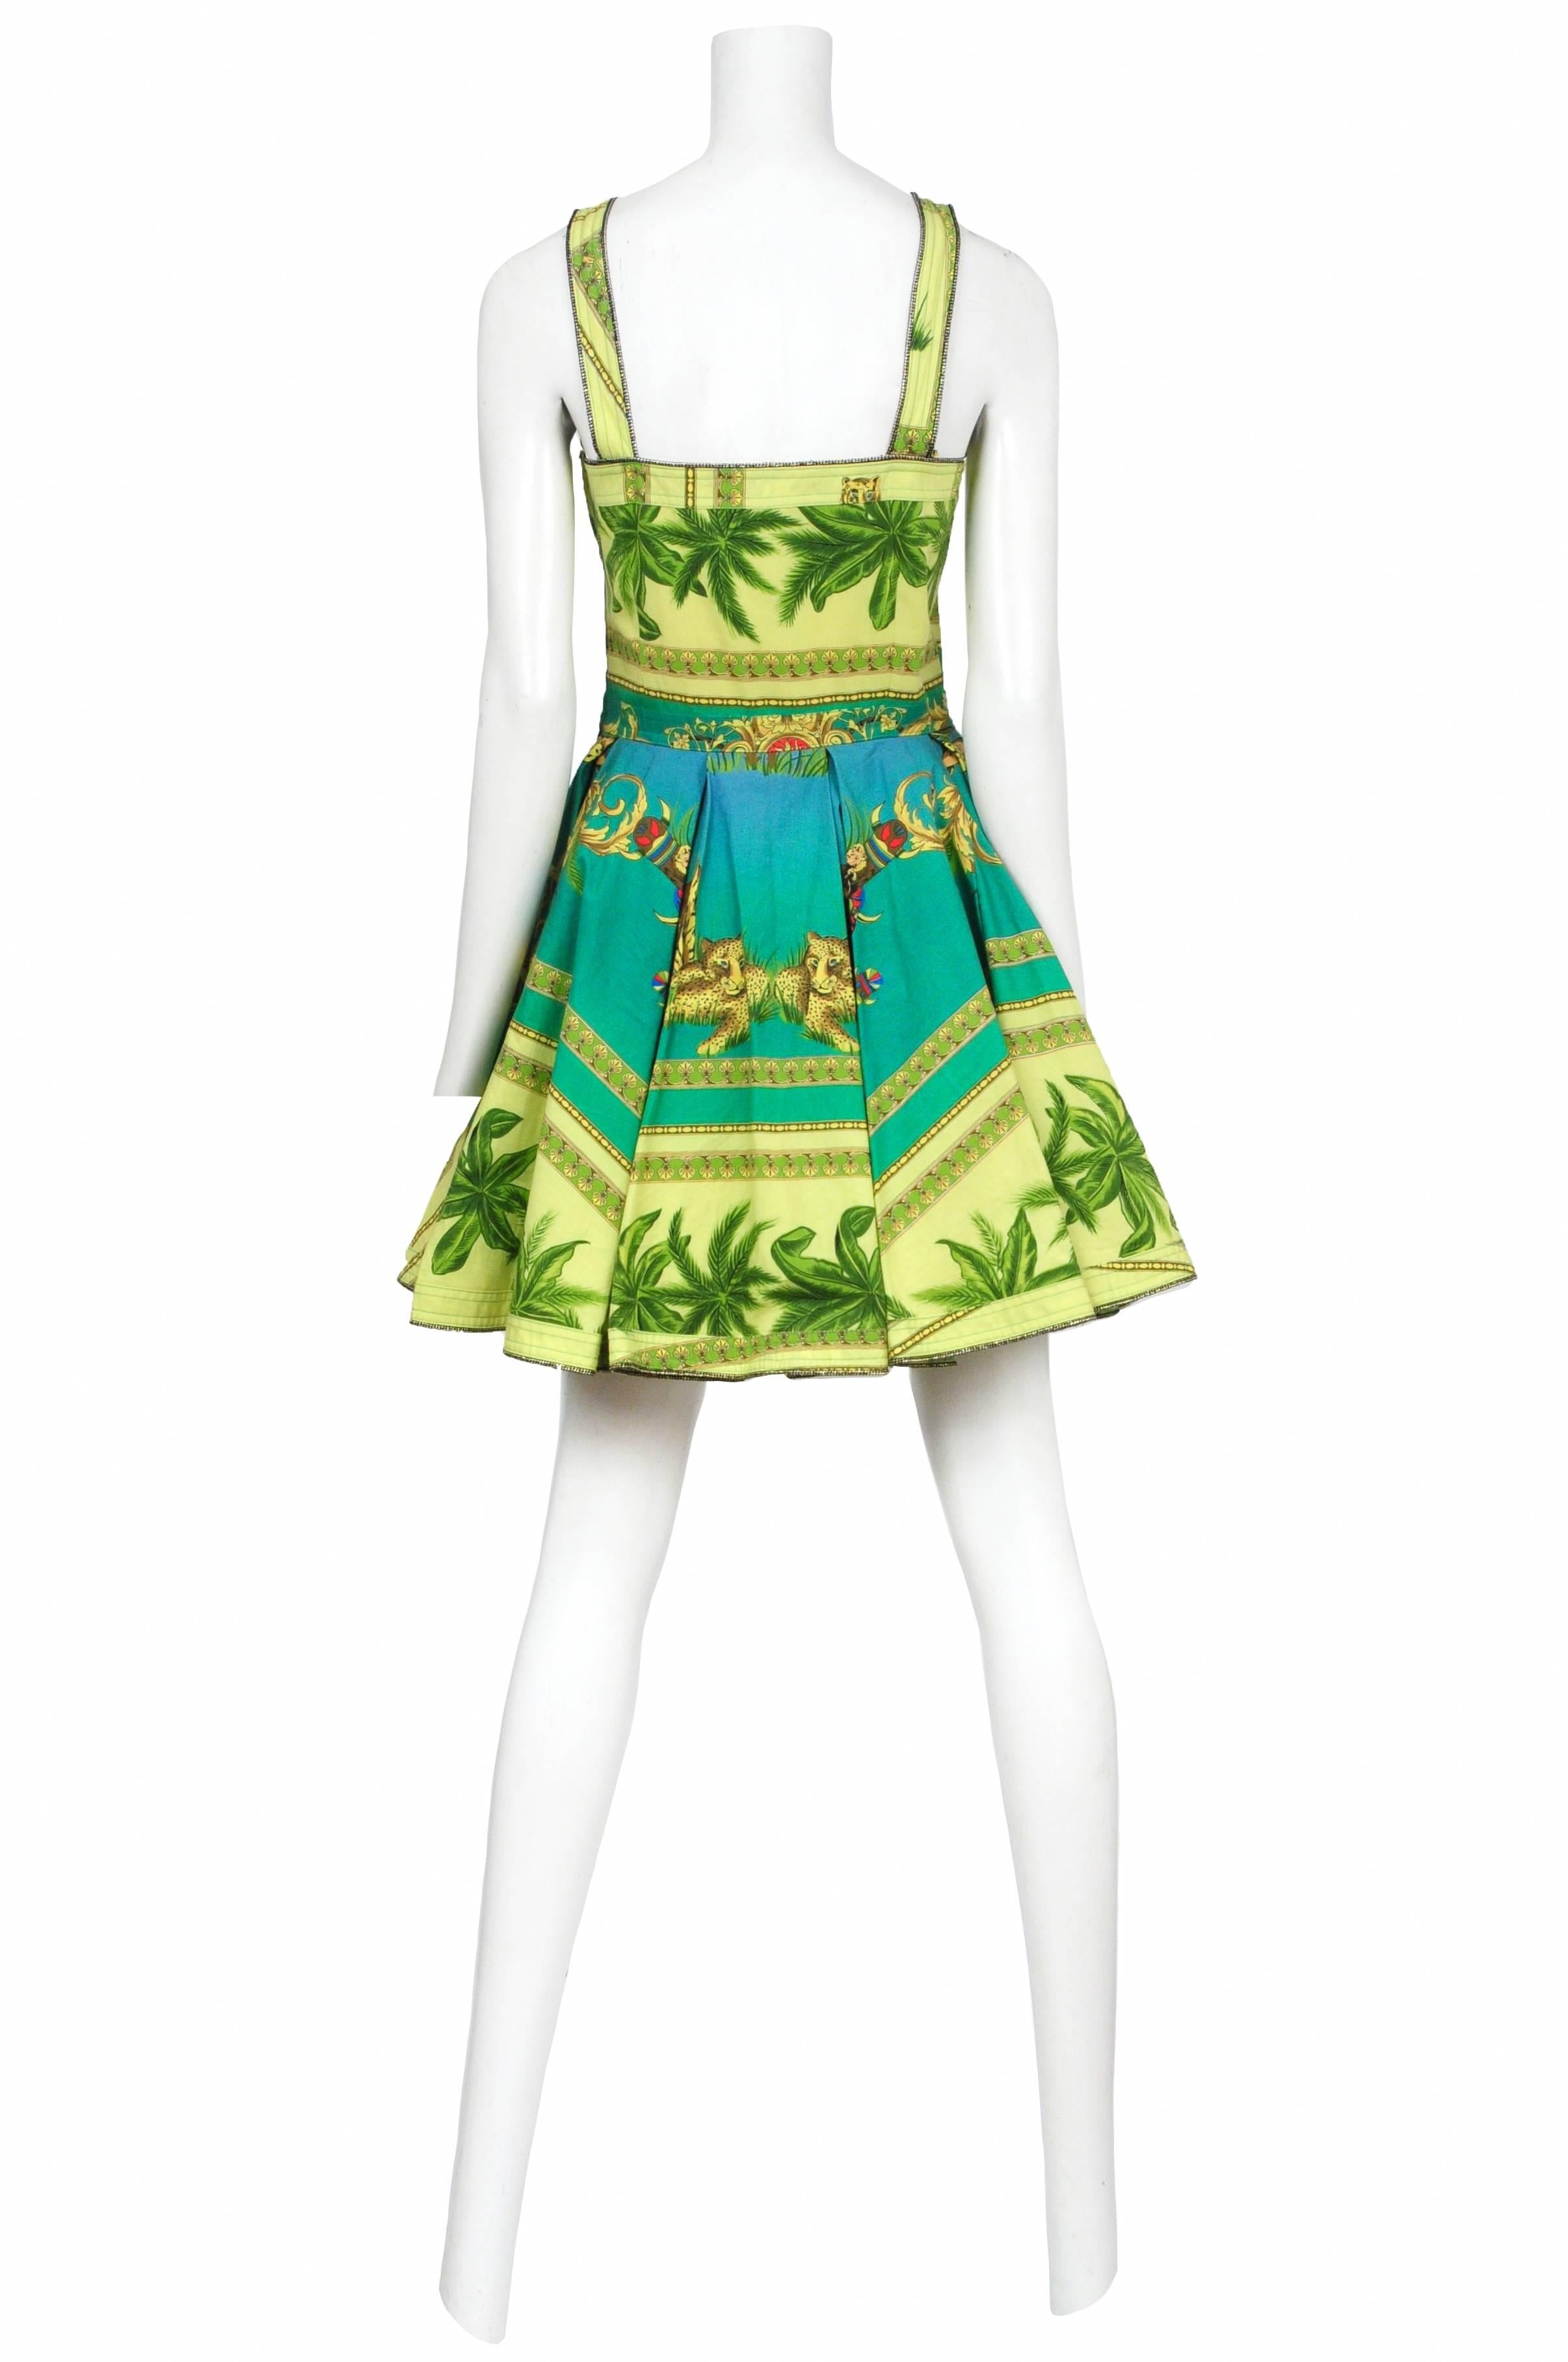 Vintage Versace green and turquoise palm tree print sun dress featuring straps connecting the chest and a fitted box pleated waist.